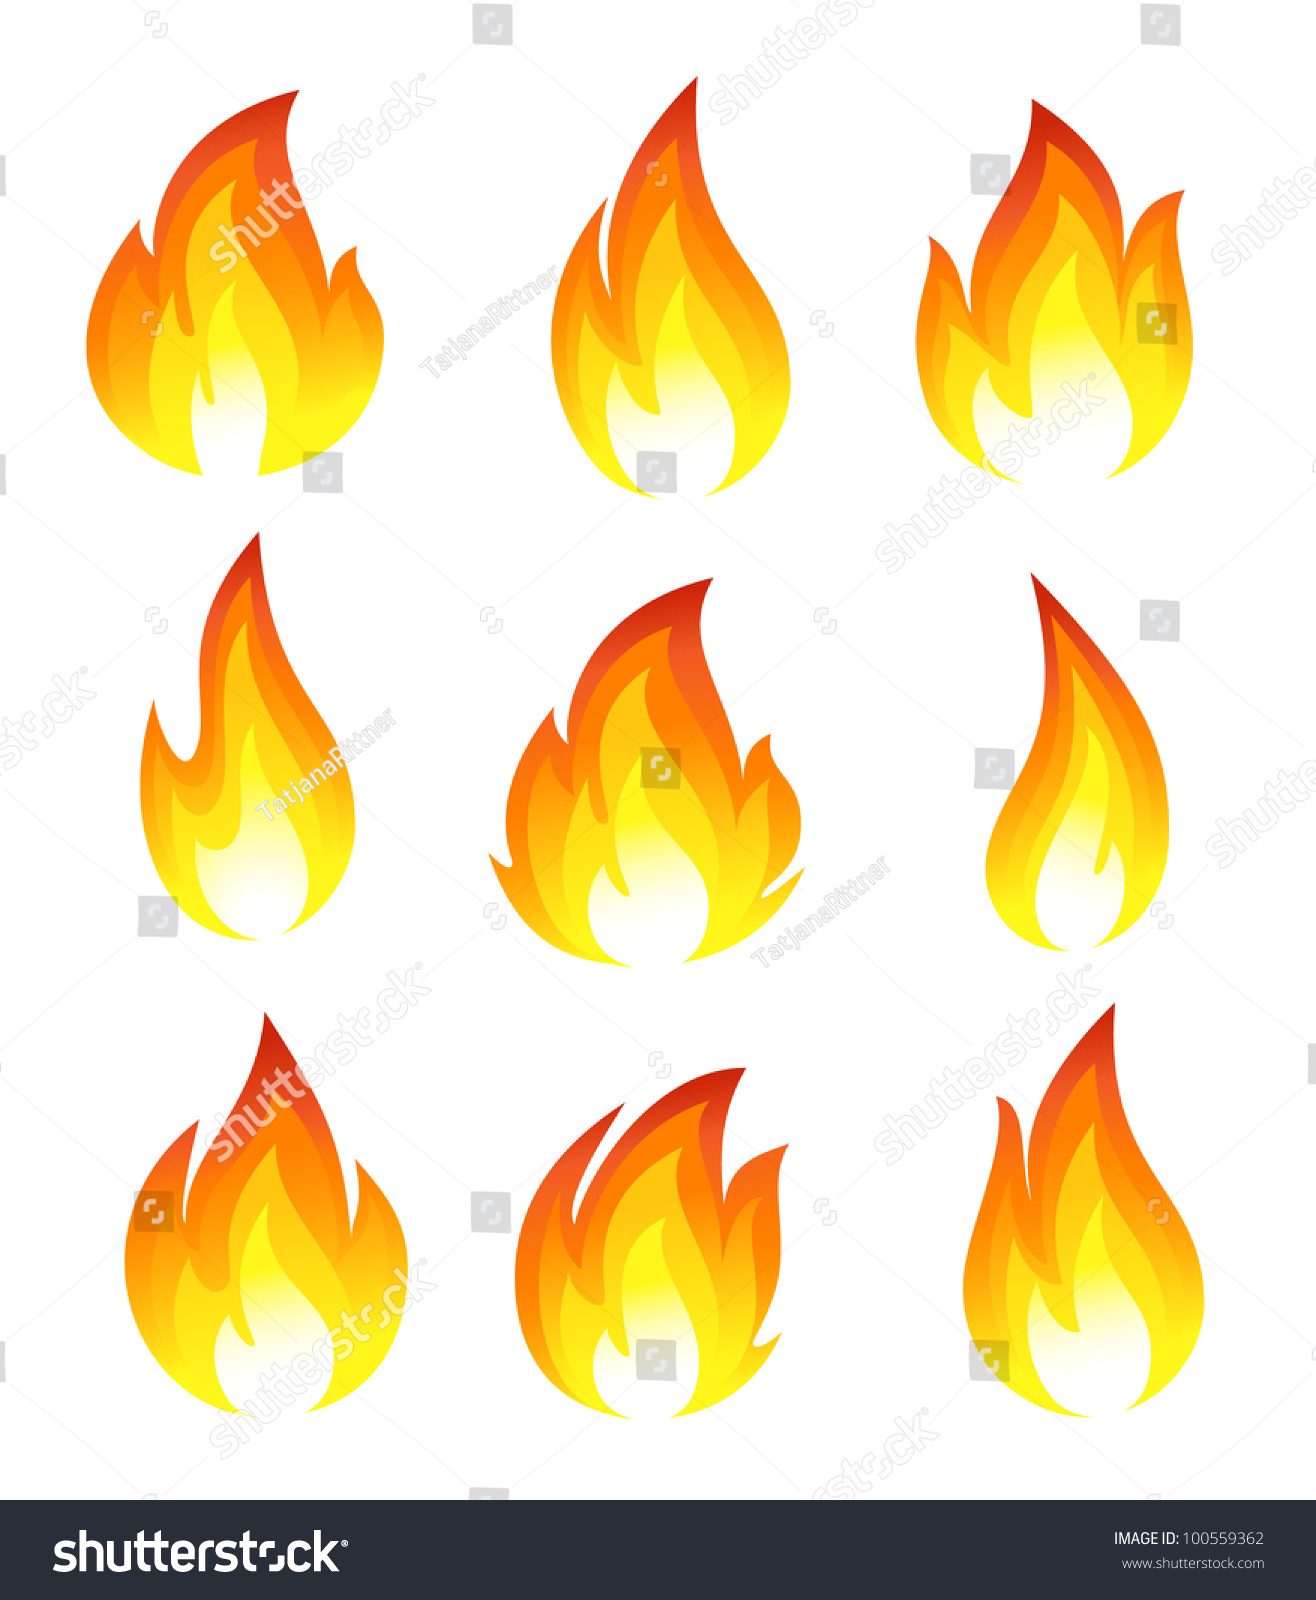 Collection Of Fire Icons Stock Vector Illustration 100559362 : Shutterstock